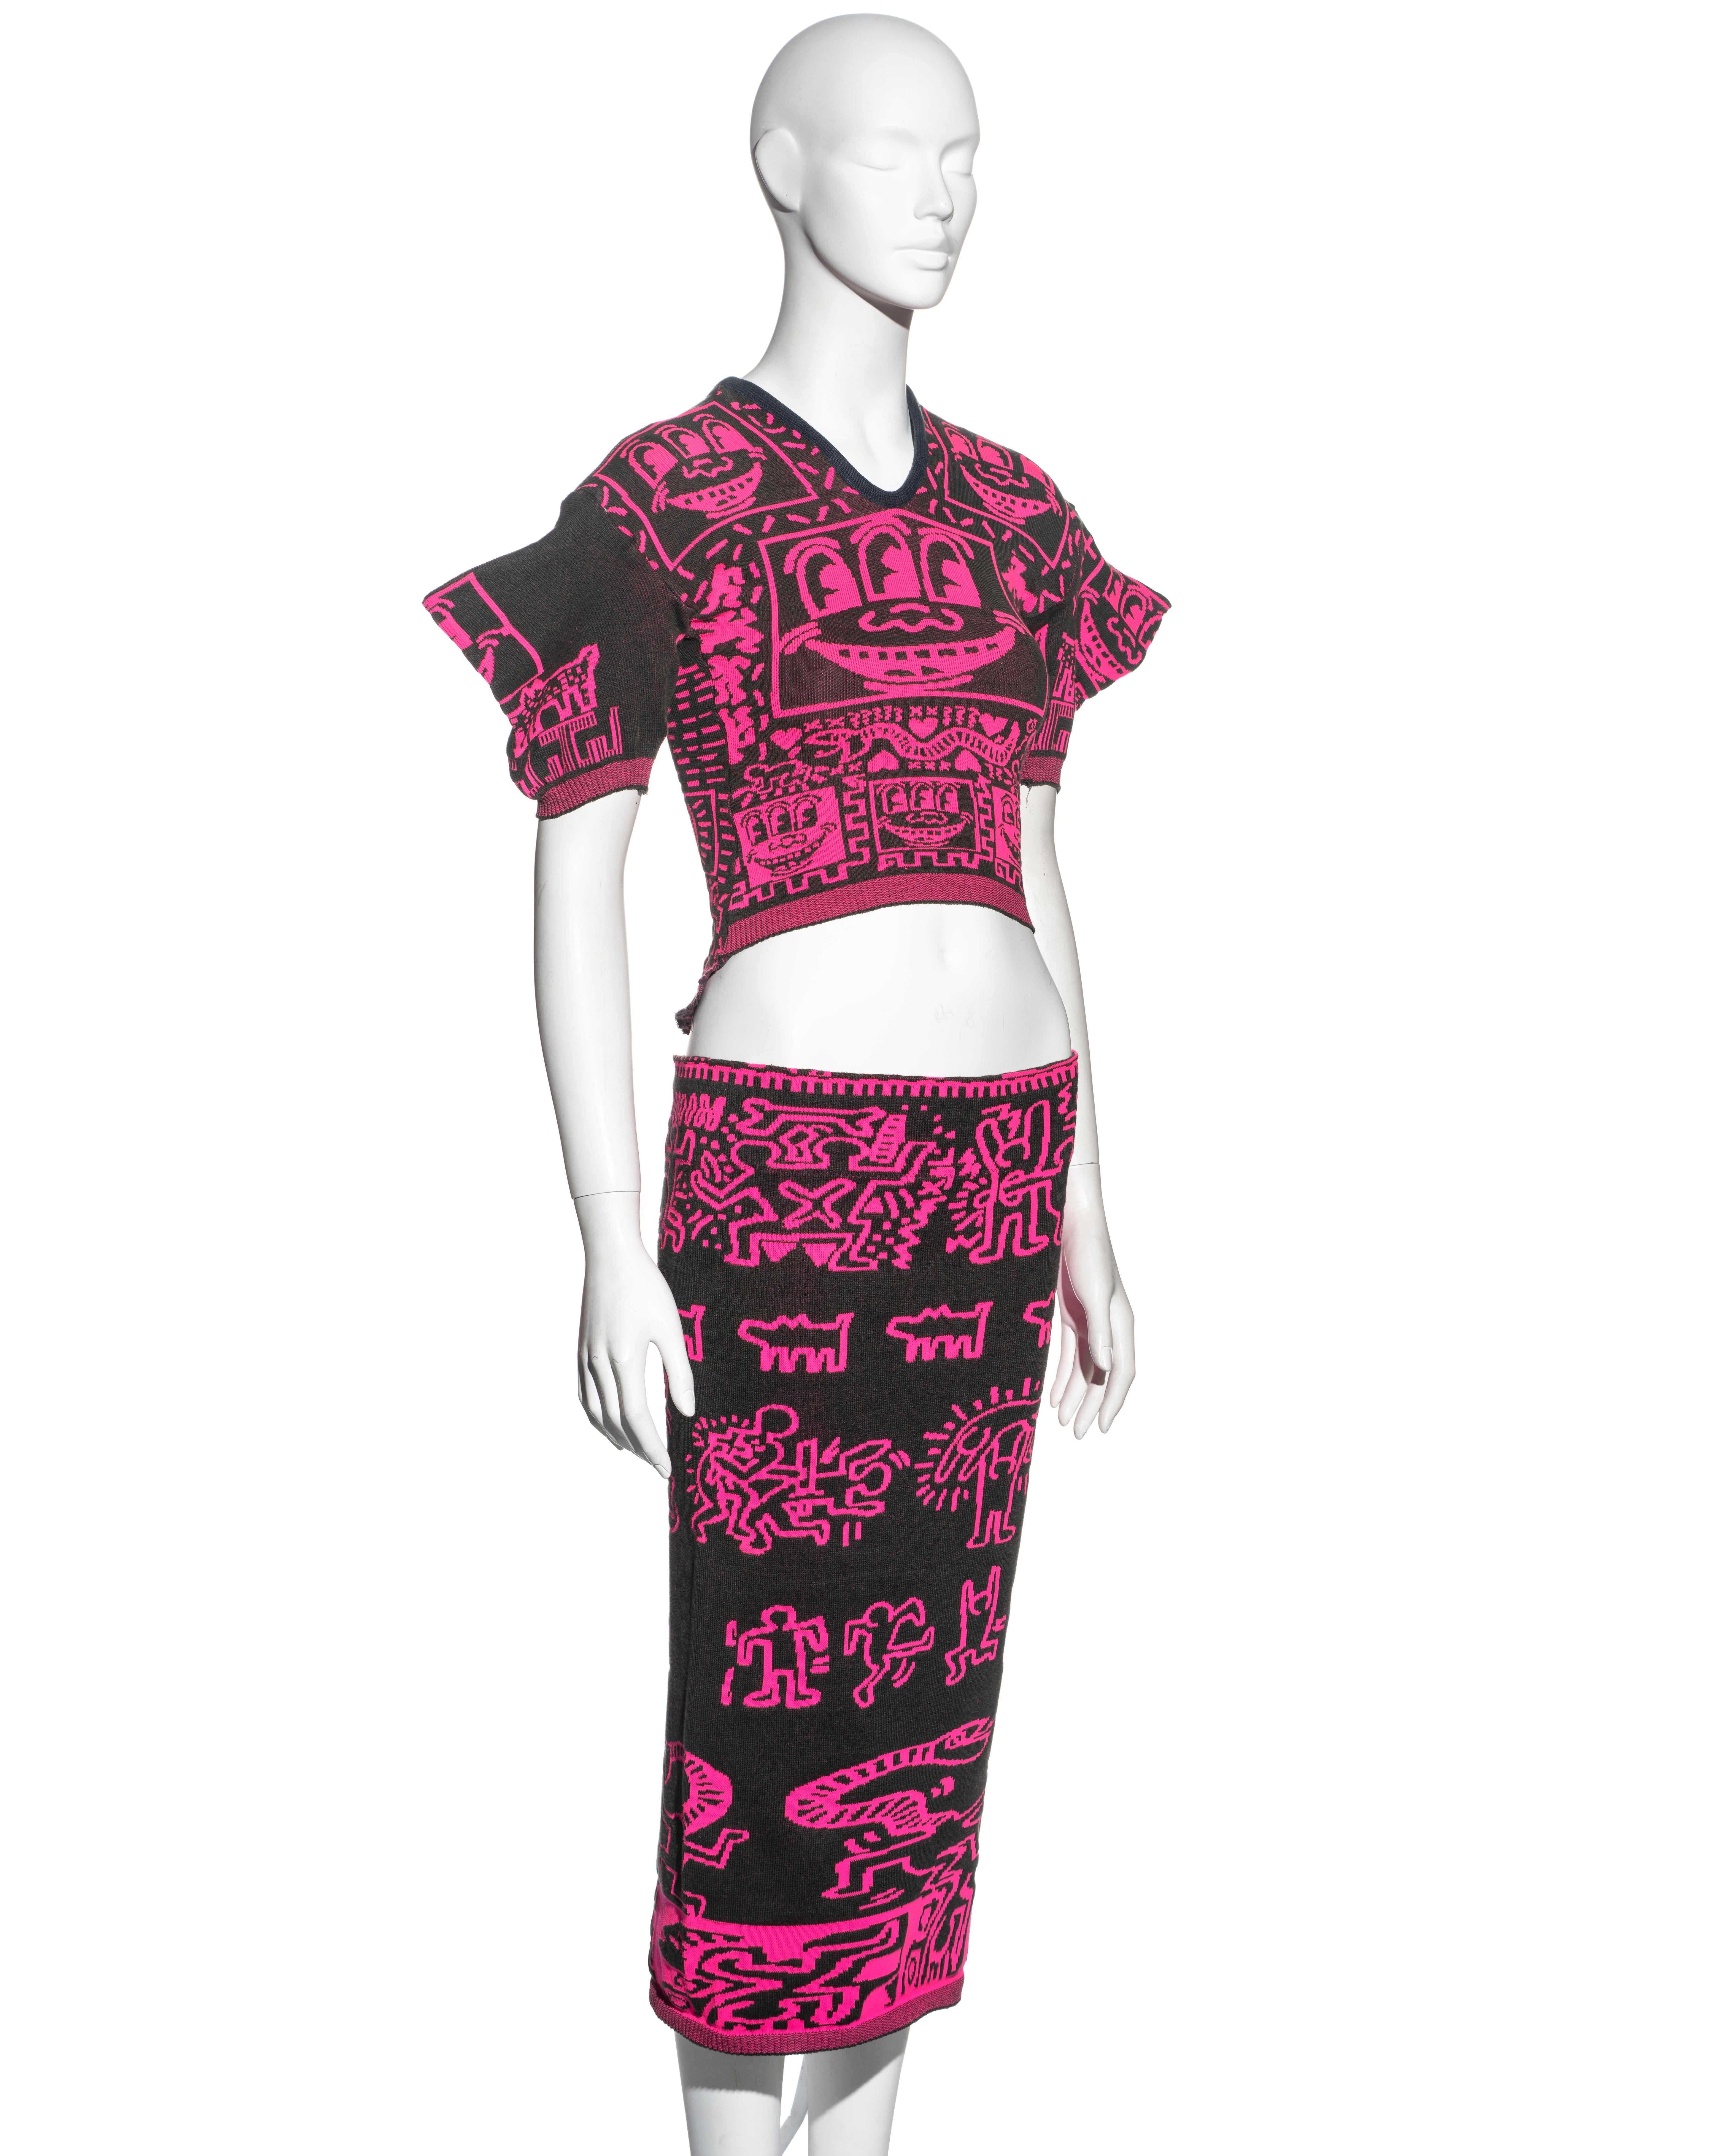 Brown Vivienne Westwood x Malcolm McLaren x Keith Haring 'Witches' skirt suit, fw 1983 For Sale